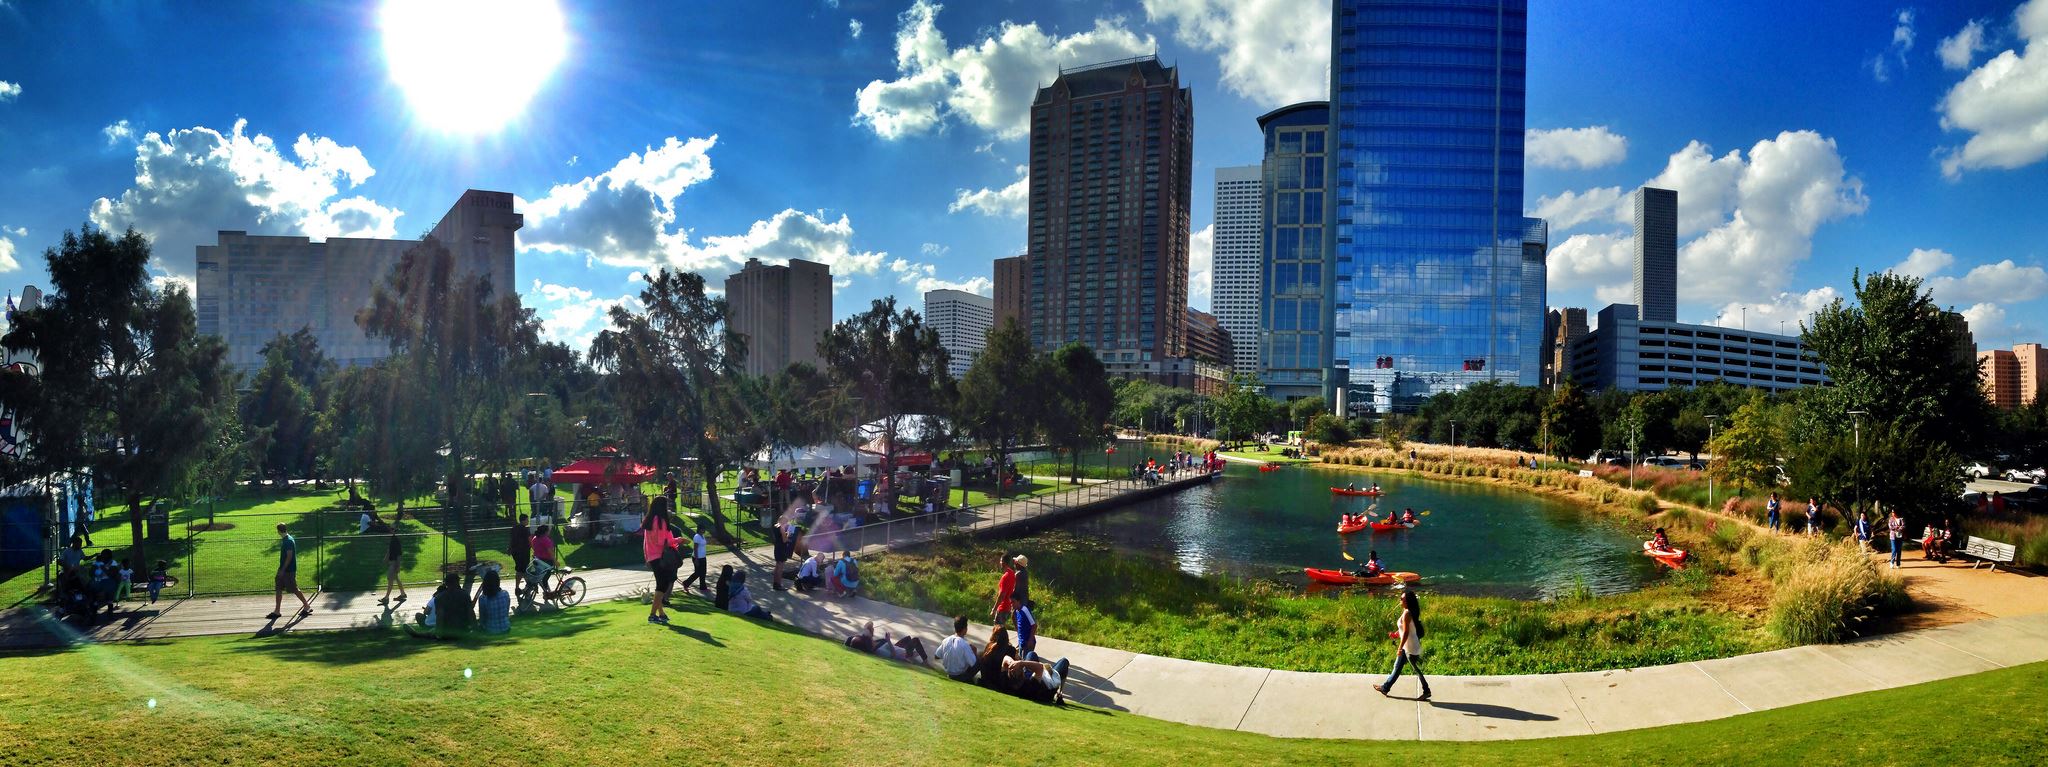 discovery green park houston